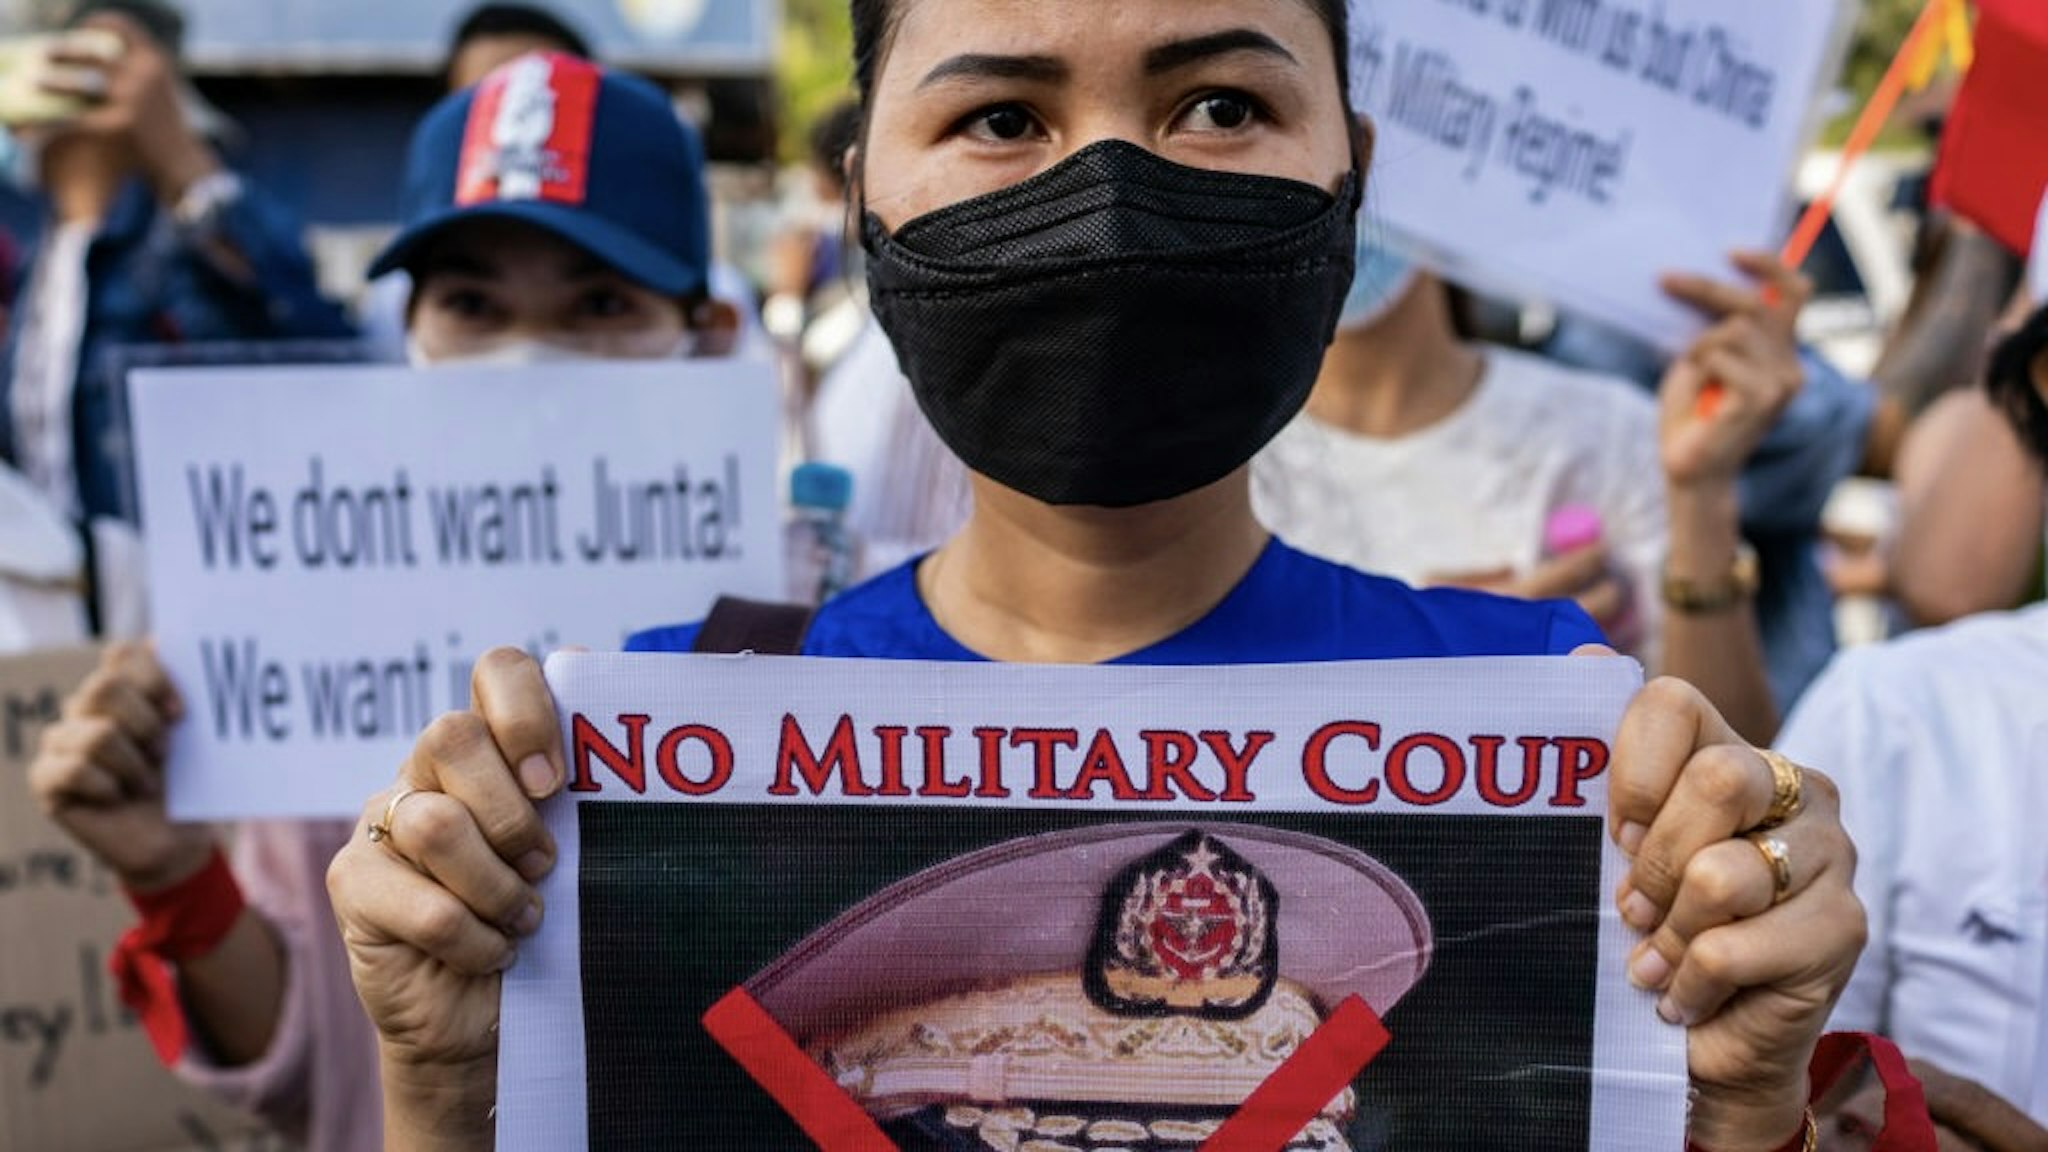 YANGON, MYANMAR - FEBRUARY 12: Protesters hold banners against the military coup and in favor of democracy outside the Russian embassy on February 12, 2021 in Yangon, Myanmar. Myanmar declared martial law in parts of the country, including its two largest cities, as protests continued to draw people to the streets after the country's military junta staged a coup against the elected National League For Democracy (NLD) government and detained de-facto leader Aung San Suu Kyi. The U.S. government imposed sanctions and froze the U.S. assets of several of the coup's leaders and their families. (Photo by Hkun Lat/Getty Images)